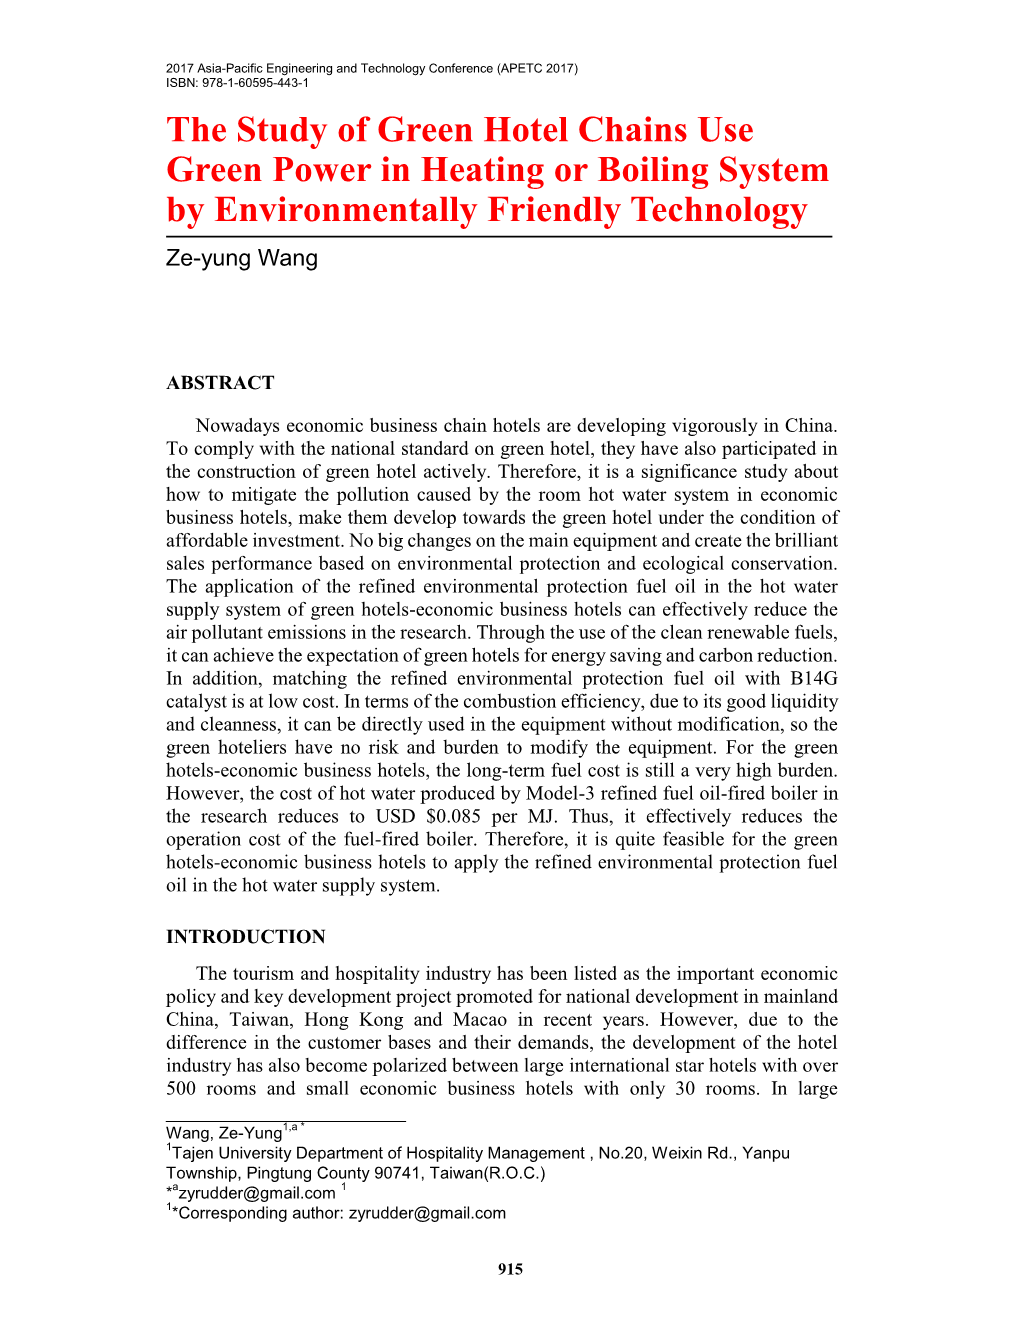 The Study of Green Hotel Chains Use Green Power in Heating Or Boiling System by Environmentally Friendly Technology Ze-Yung Wang